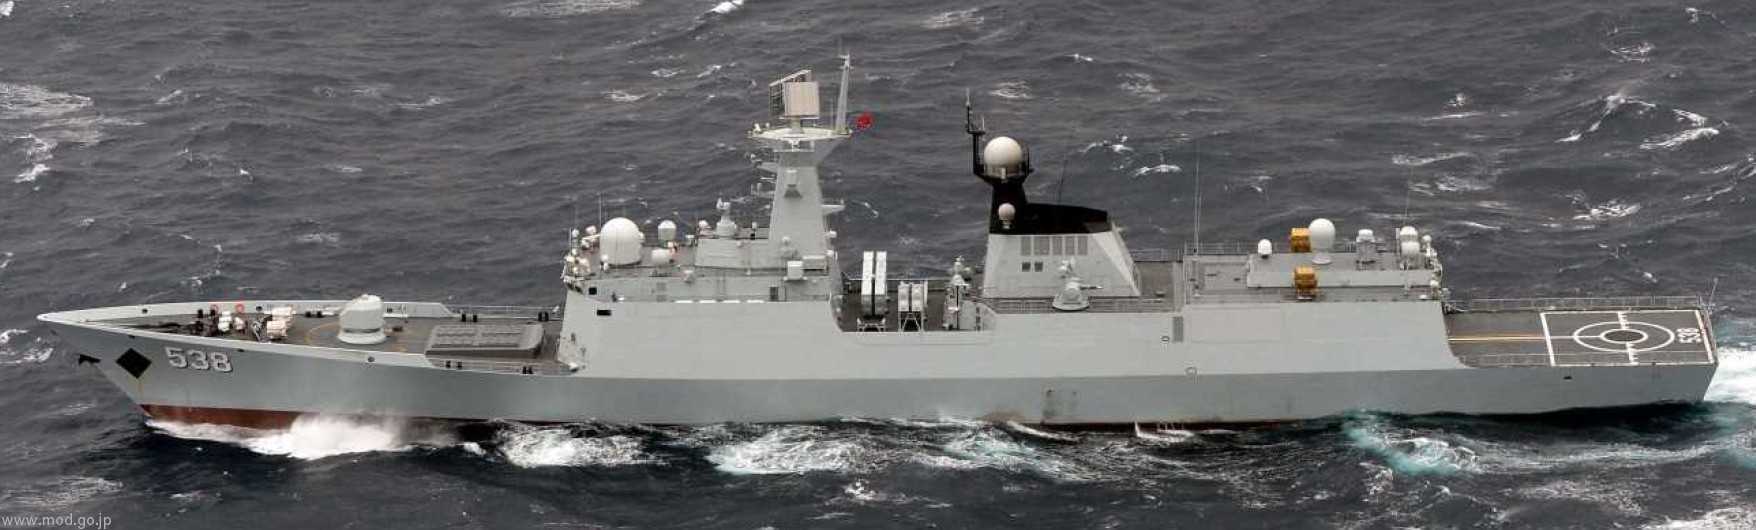 ffg-538 plans yantai type 054a jiangkai ii class guided missile frigate china people's liberation army navy 04